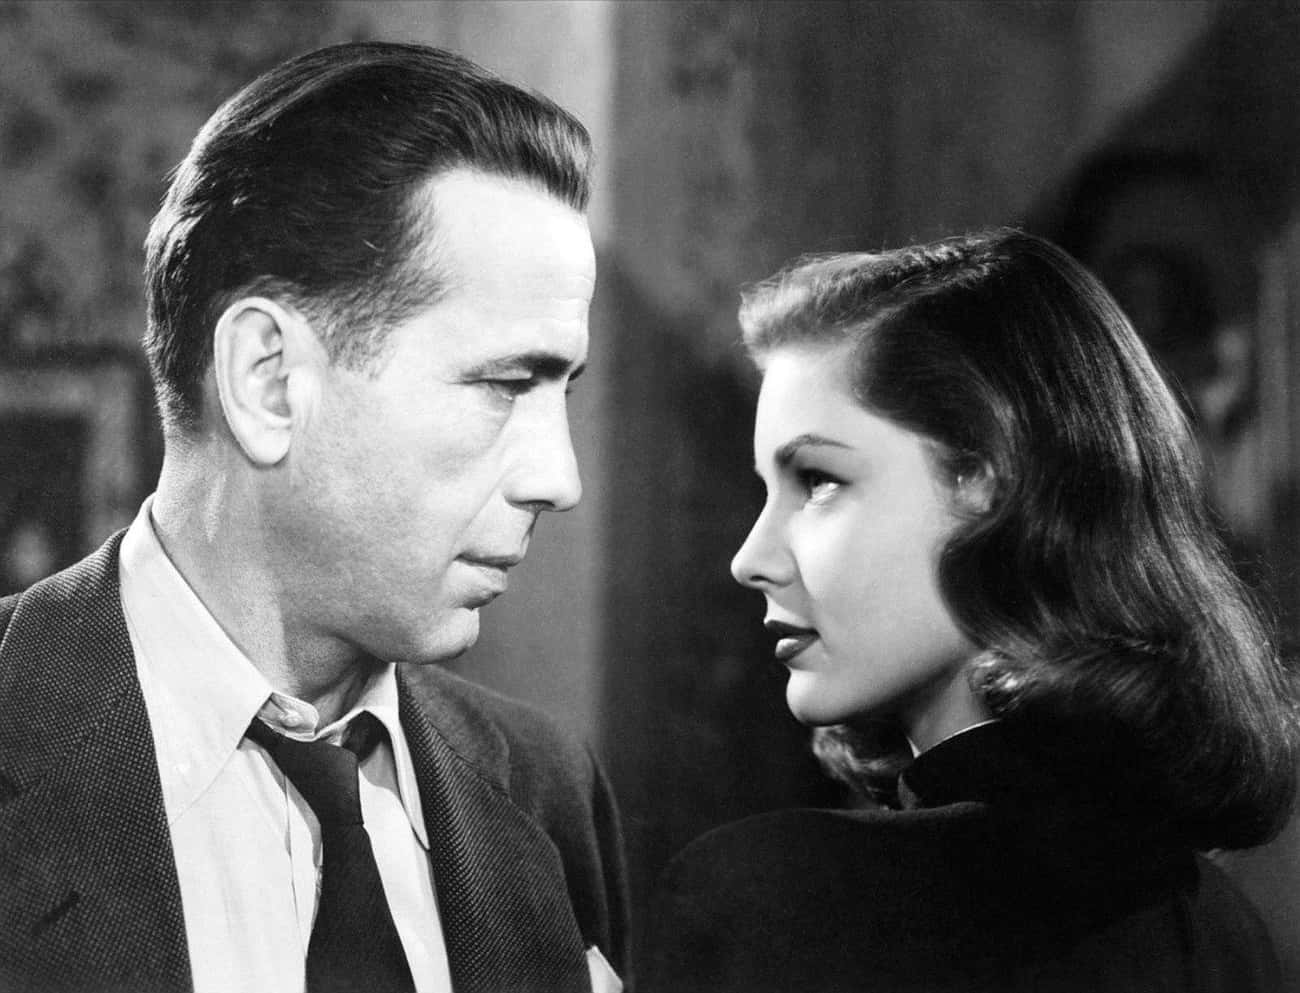 No One Wanted Lauren Bacall And Humphrey Bogart To Get Together, Particularly Bogart's Wife